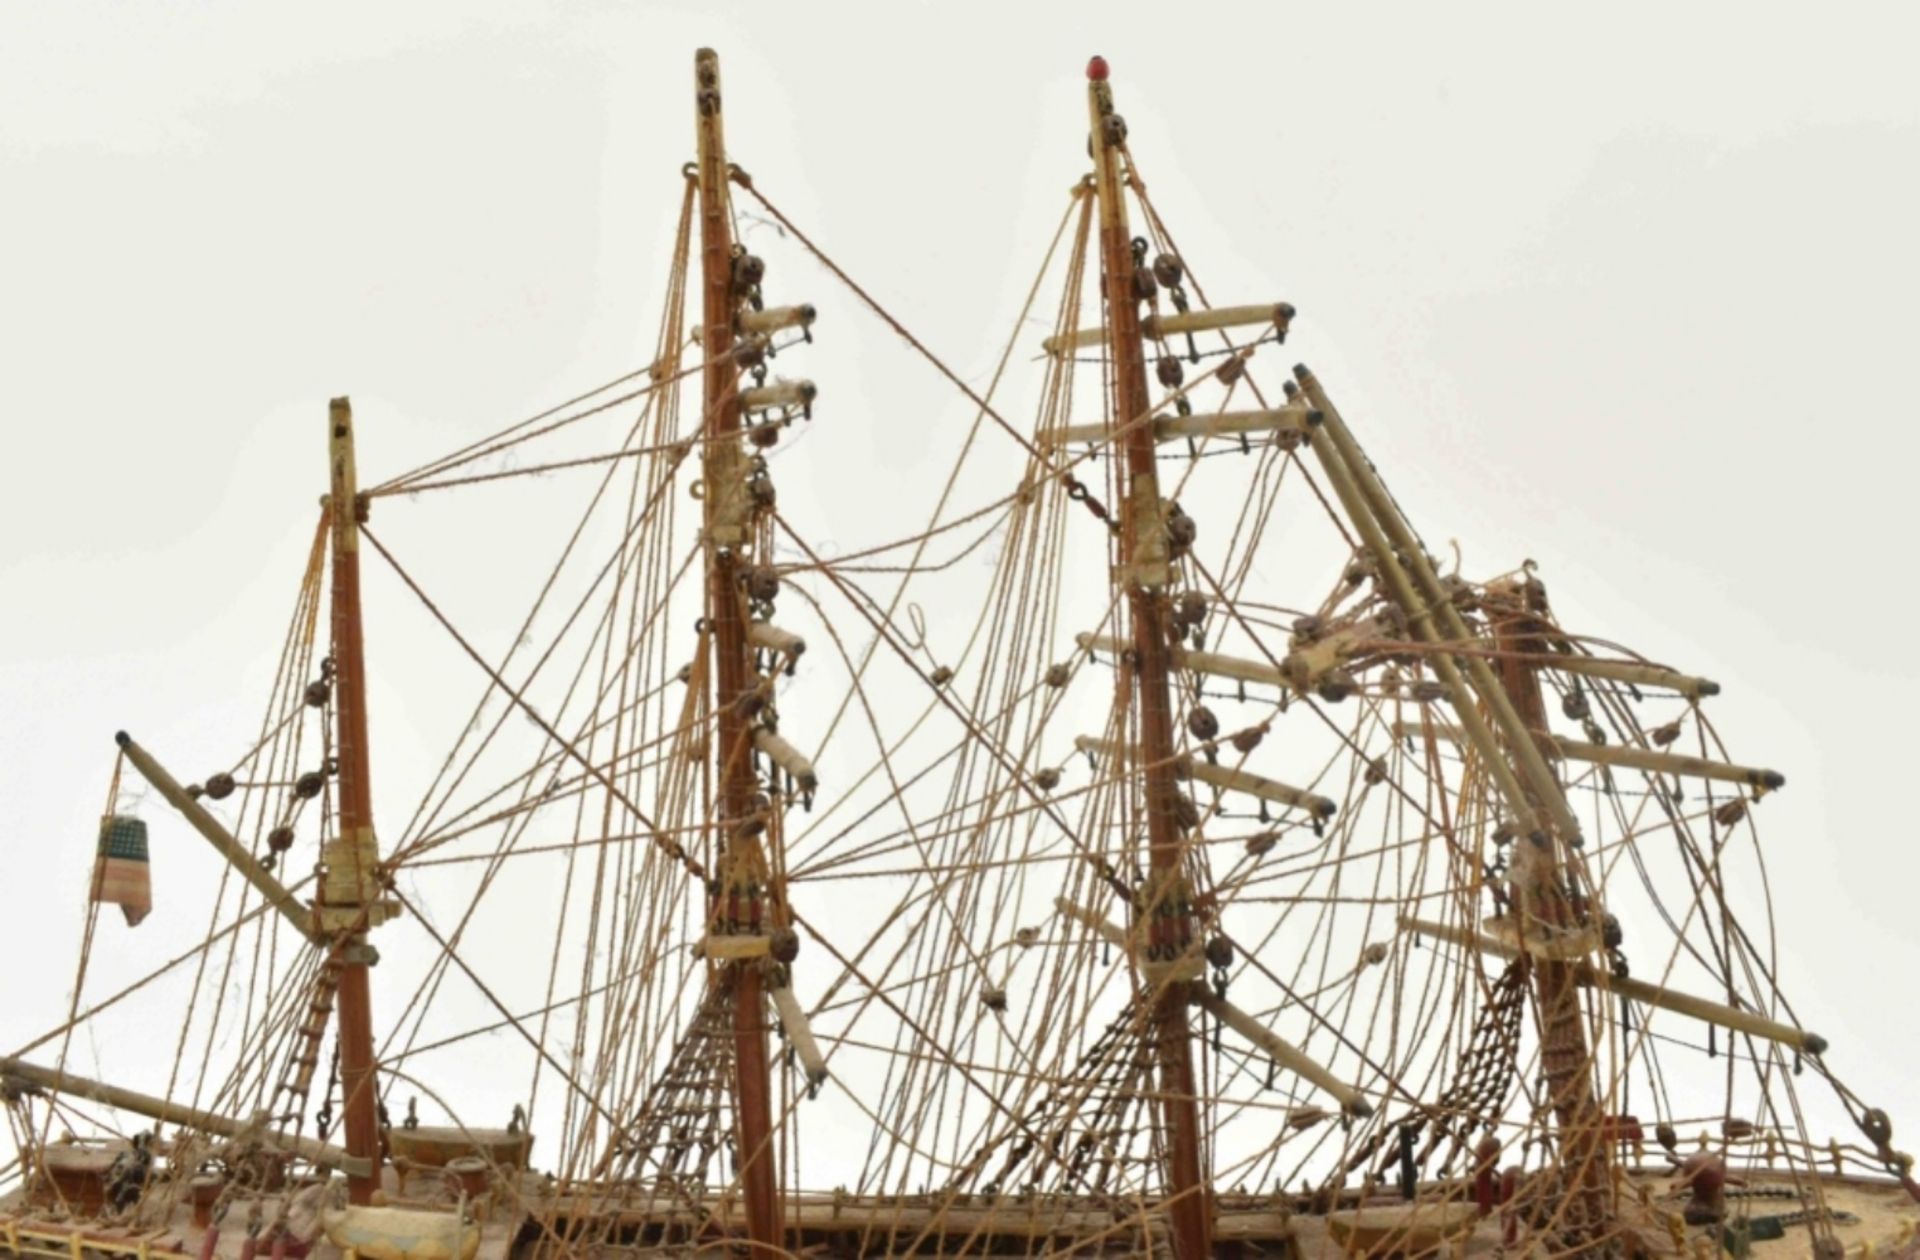 Historic model of 4 masted barque - Image 6 of 6